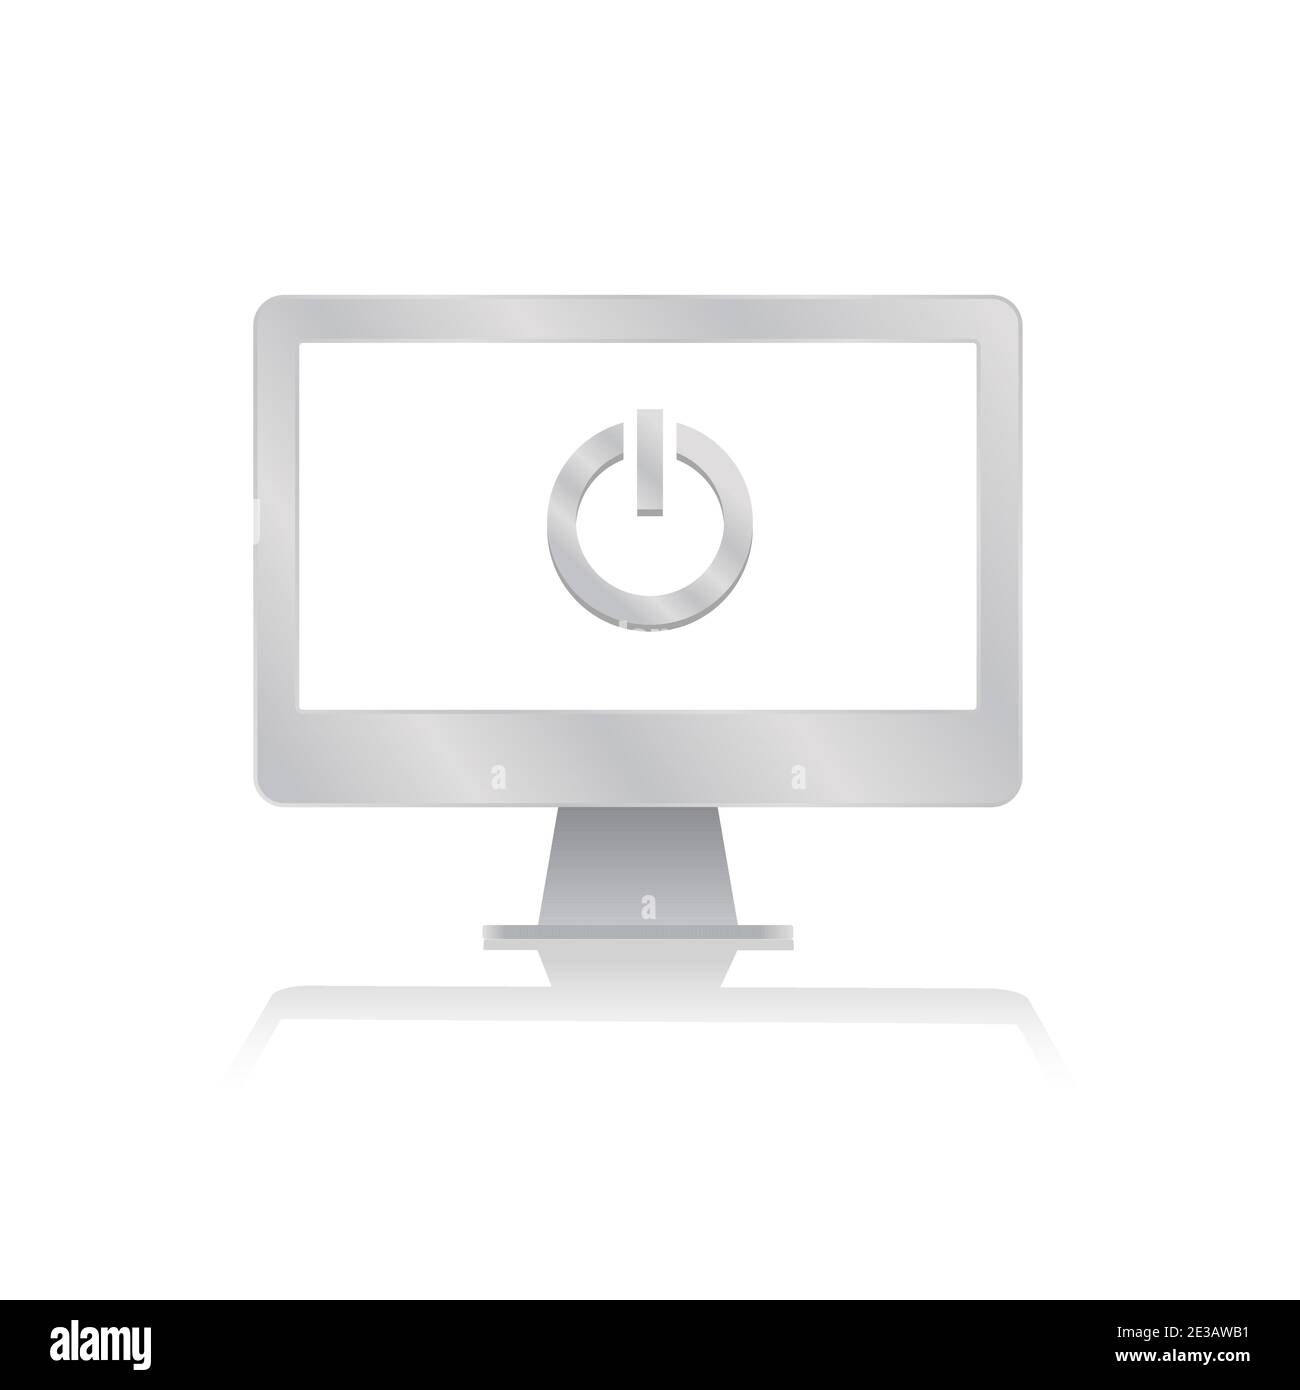 on off switch icon inside blank screen computer monitor with reflection minimalist modern icon vector illustration Stock Vector